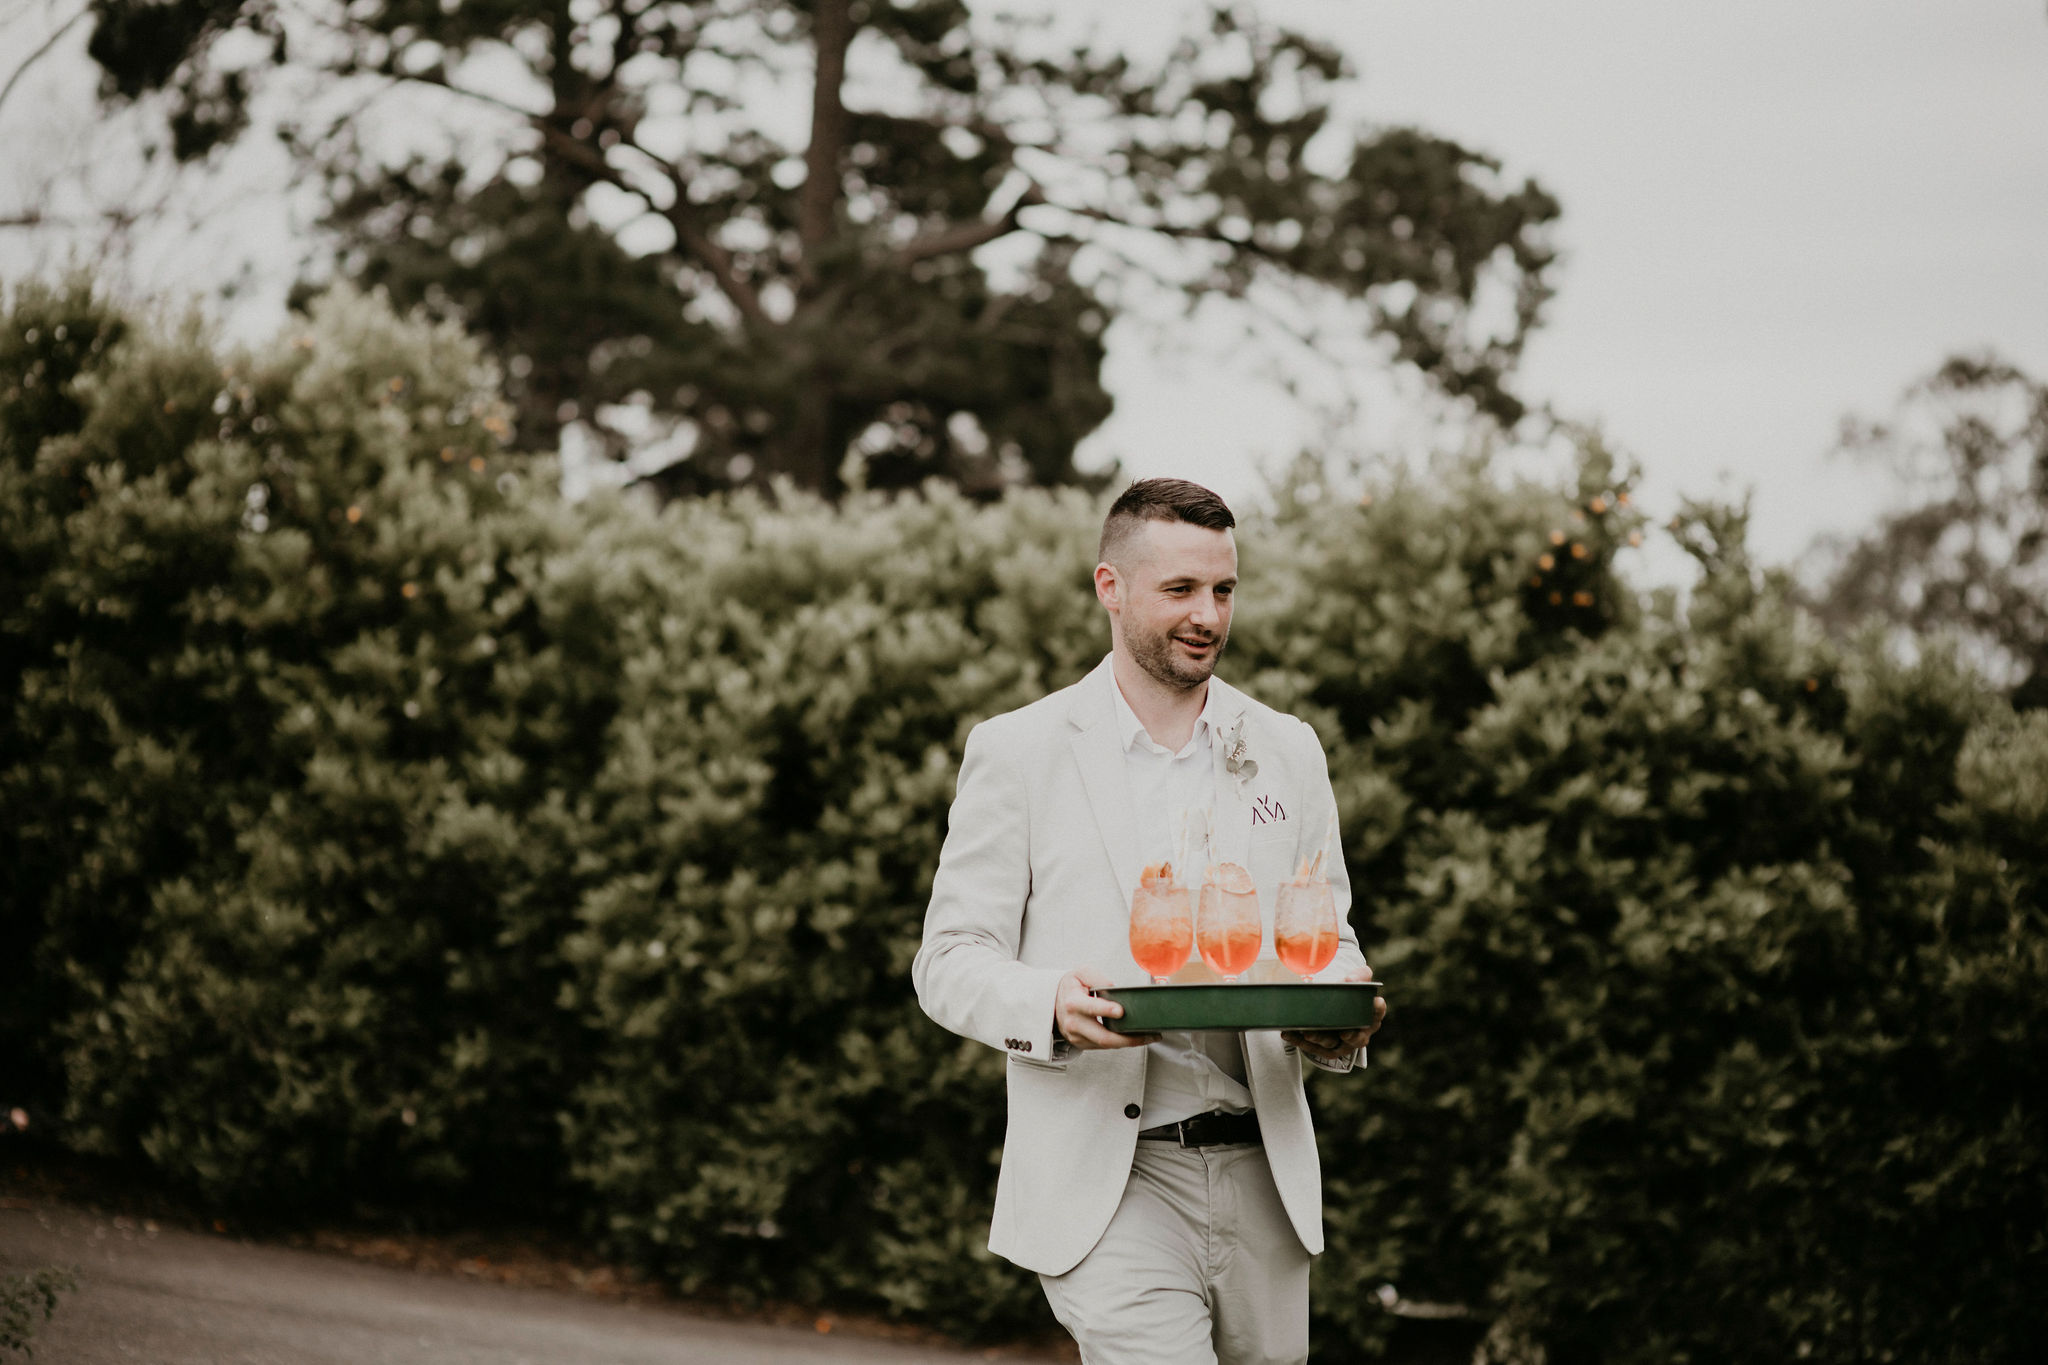 Lets-Elope-Melbourne-Celebrant-Photographer-Elopement-Package-Victoria-Sarah-Matler-Photography-Orchard-with-Kids-Farm-Vigano-weddings-intimate-11